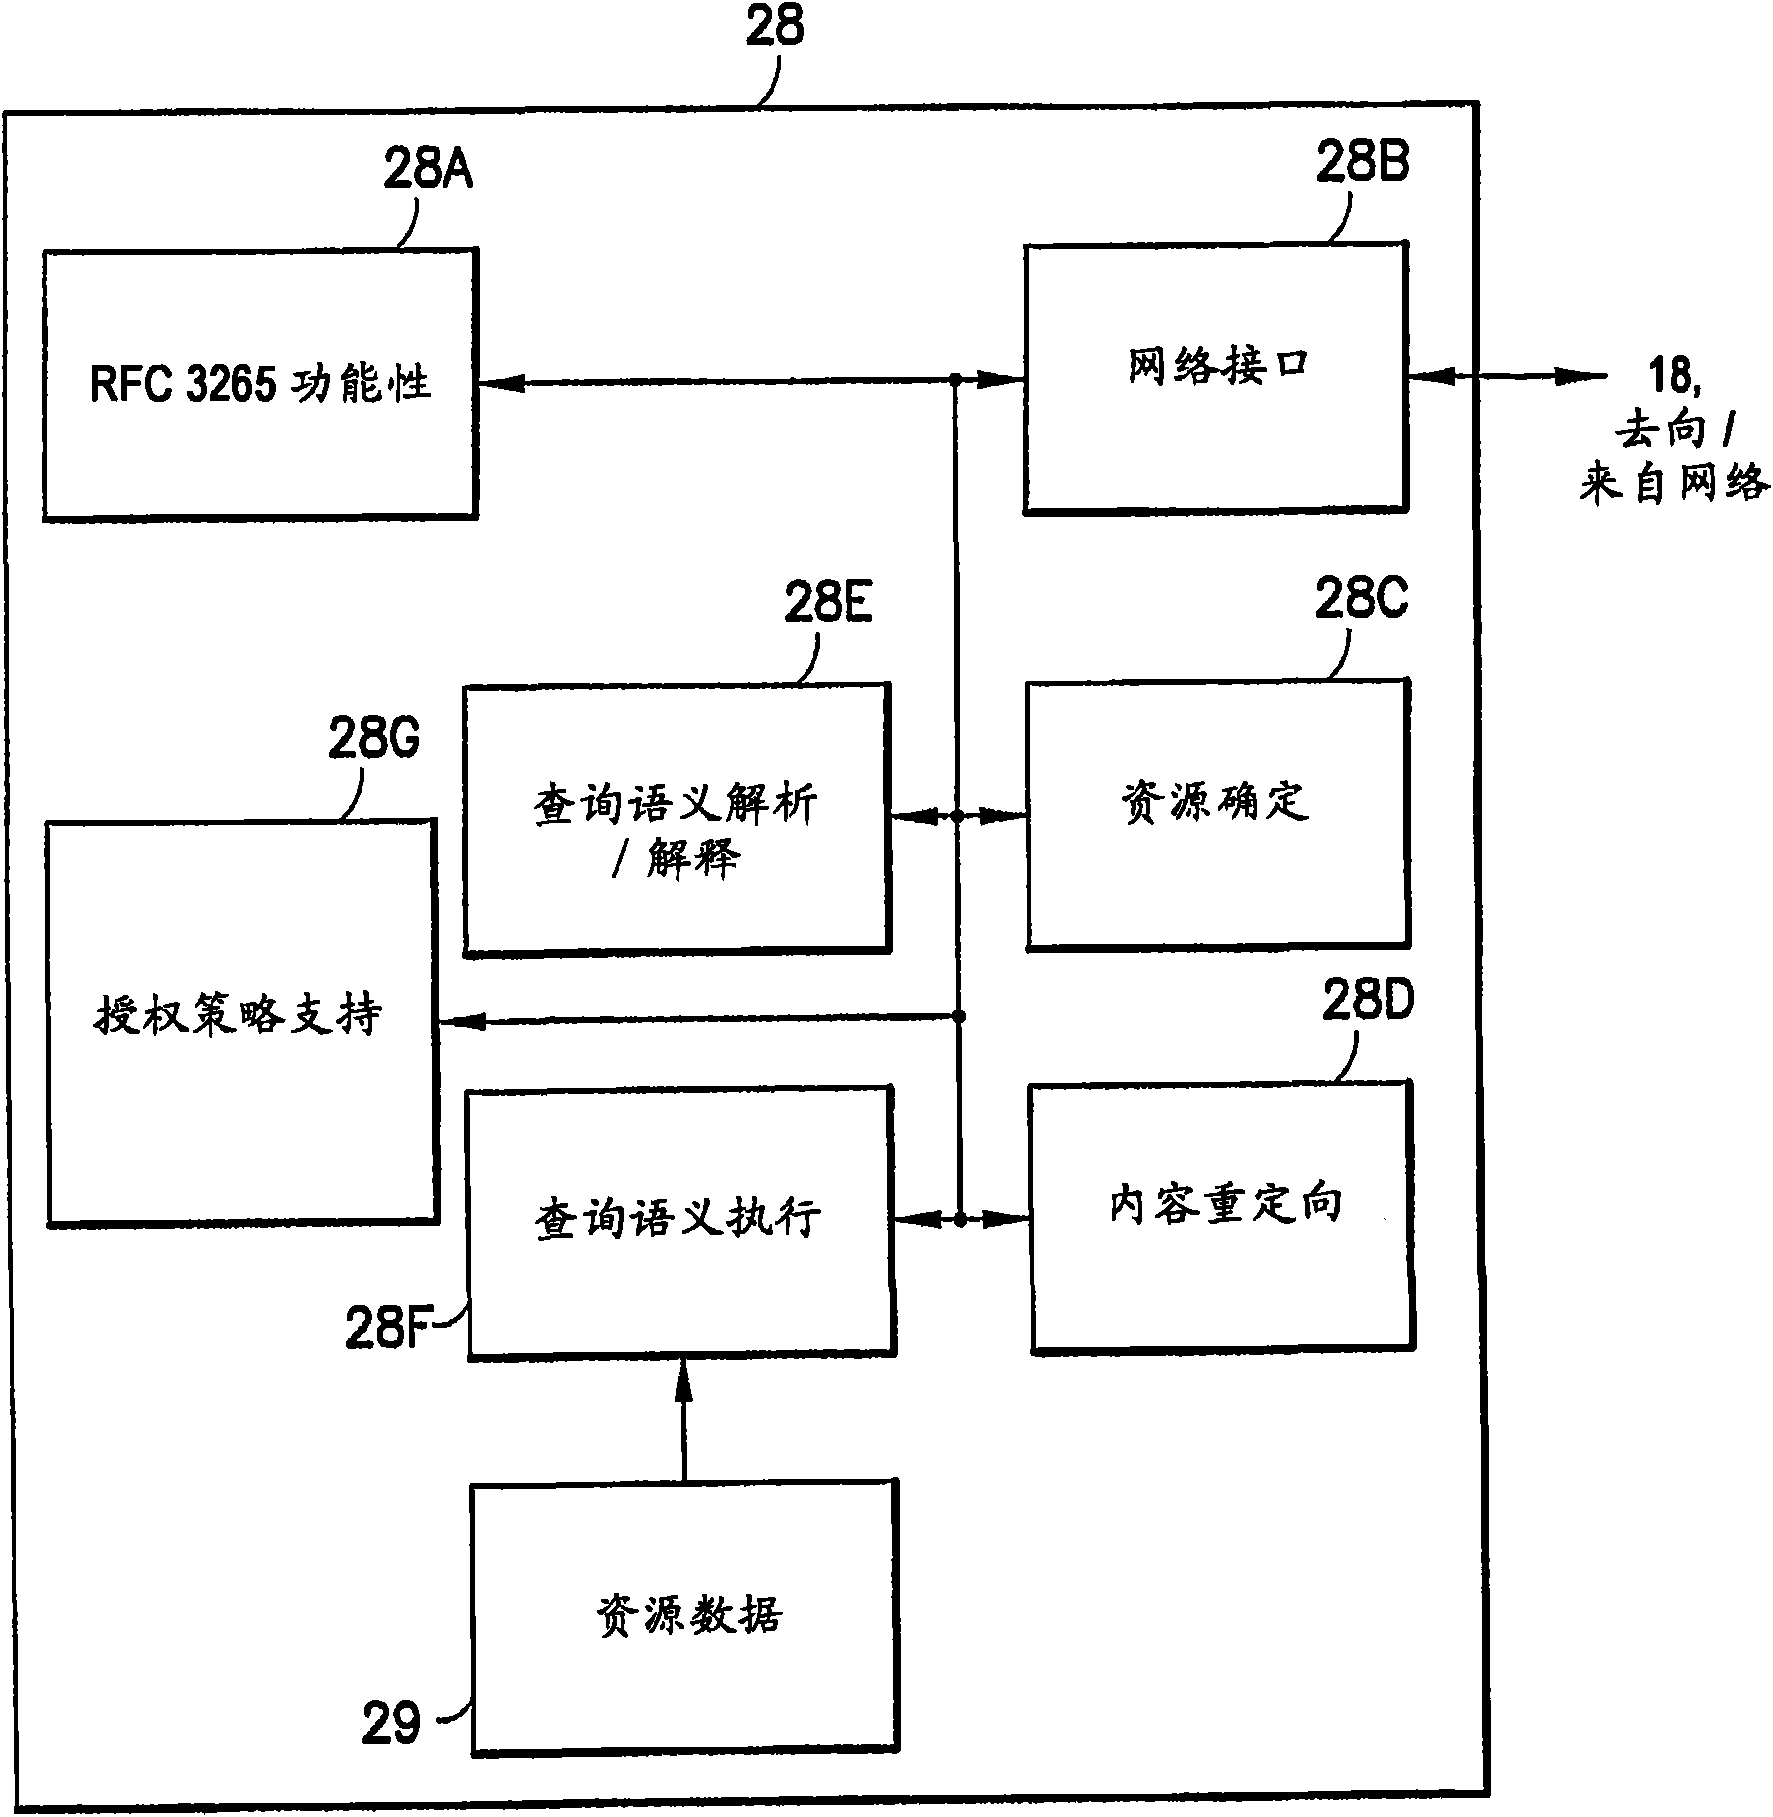 Method, system and system to enable discovery of services and content